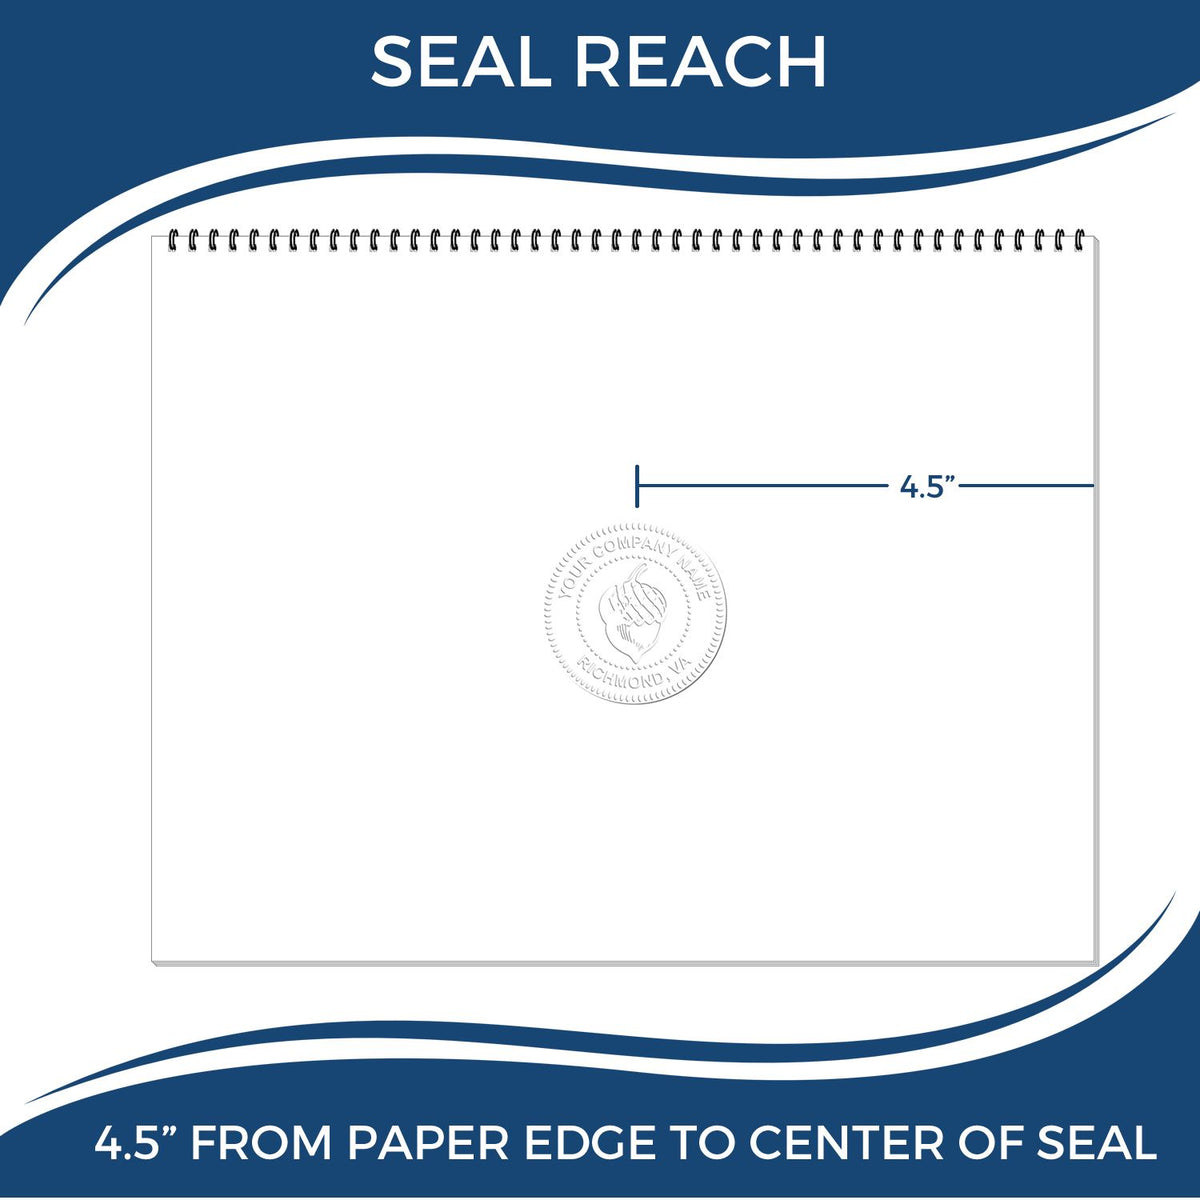 An infographic showing the seal reach which is represented by a ruler and a miniature seal image of the State of Louisiana Extended Long Reach Geologist Seal